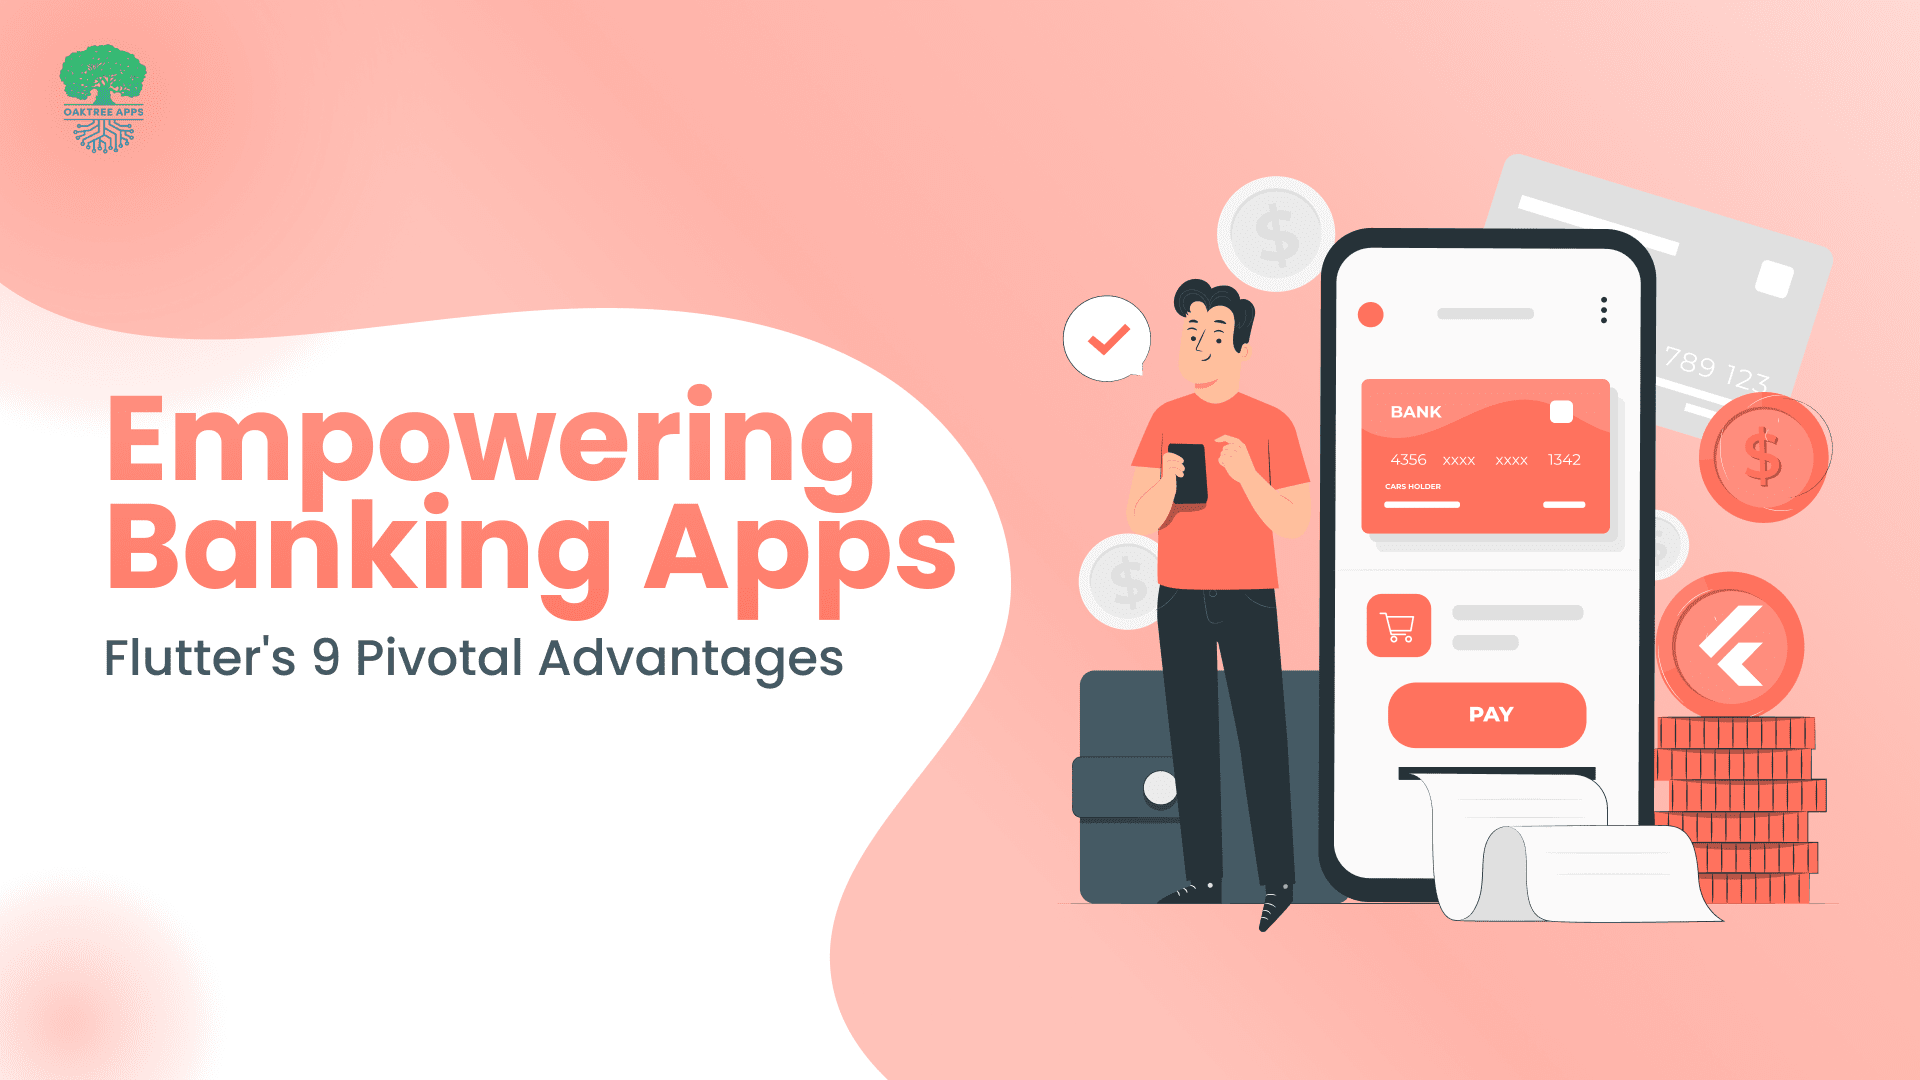 Empowering_Banking_Apps_Flutters_9_Pivotal_Advantages.png